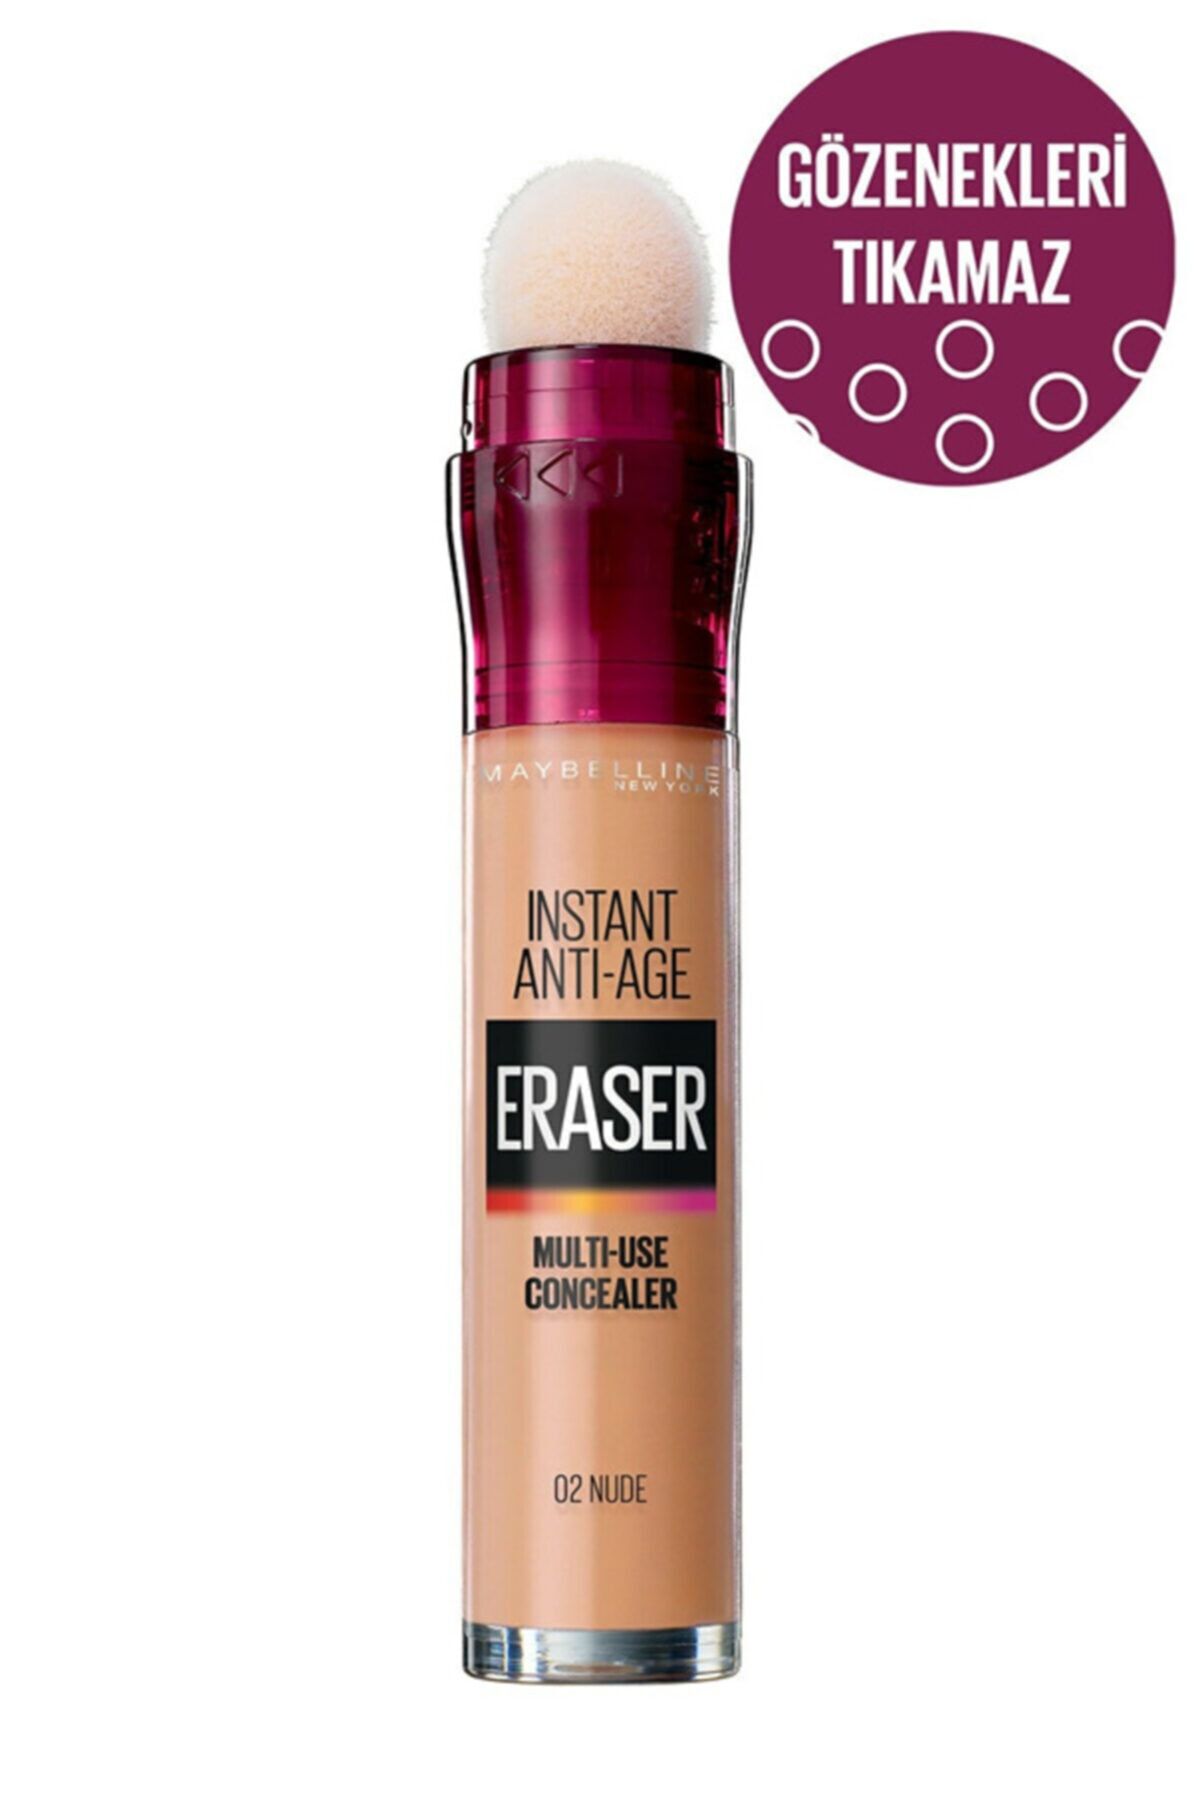 Maybelline New York Instant Anti-age Eraser Multi-use 02 Nude Concealer 6.8ml